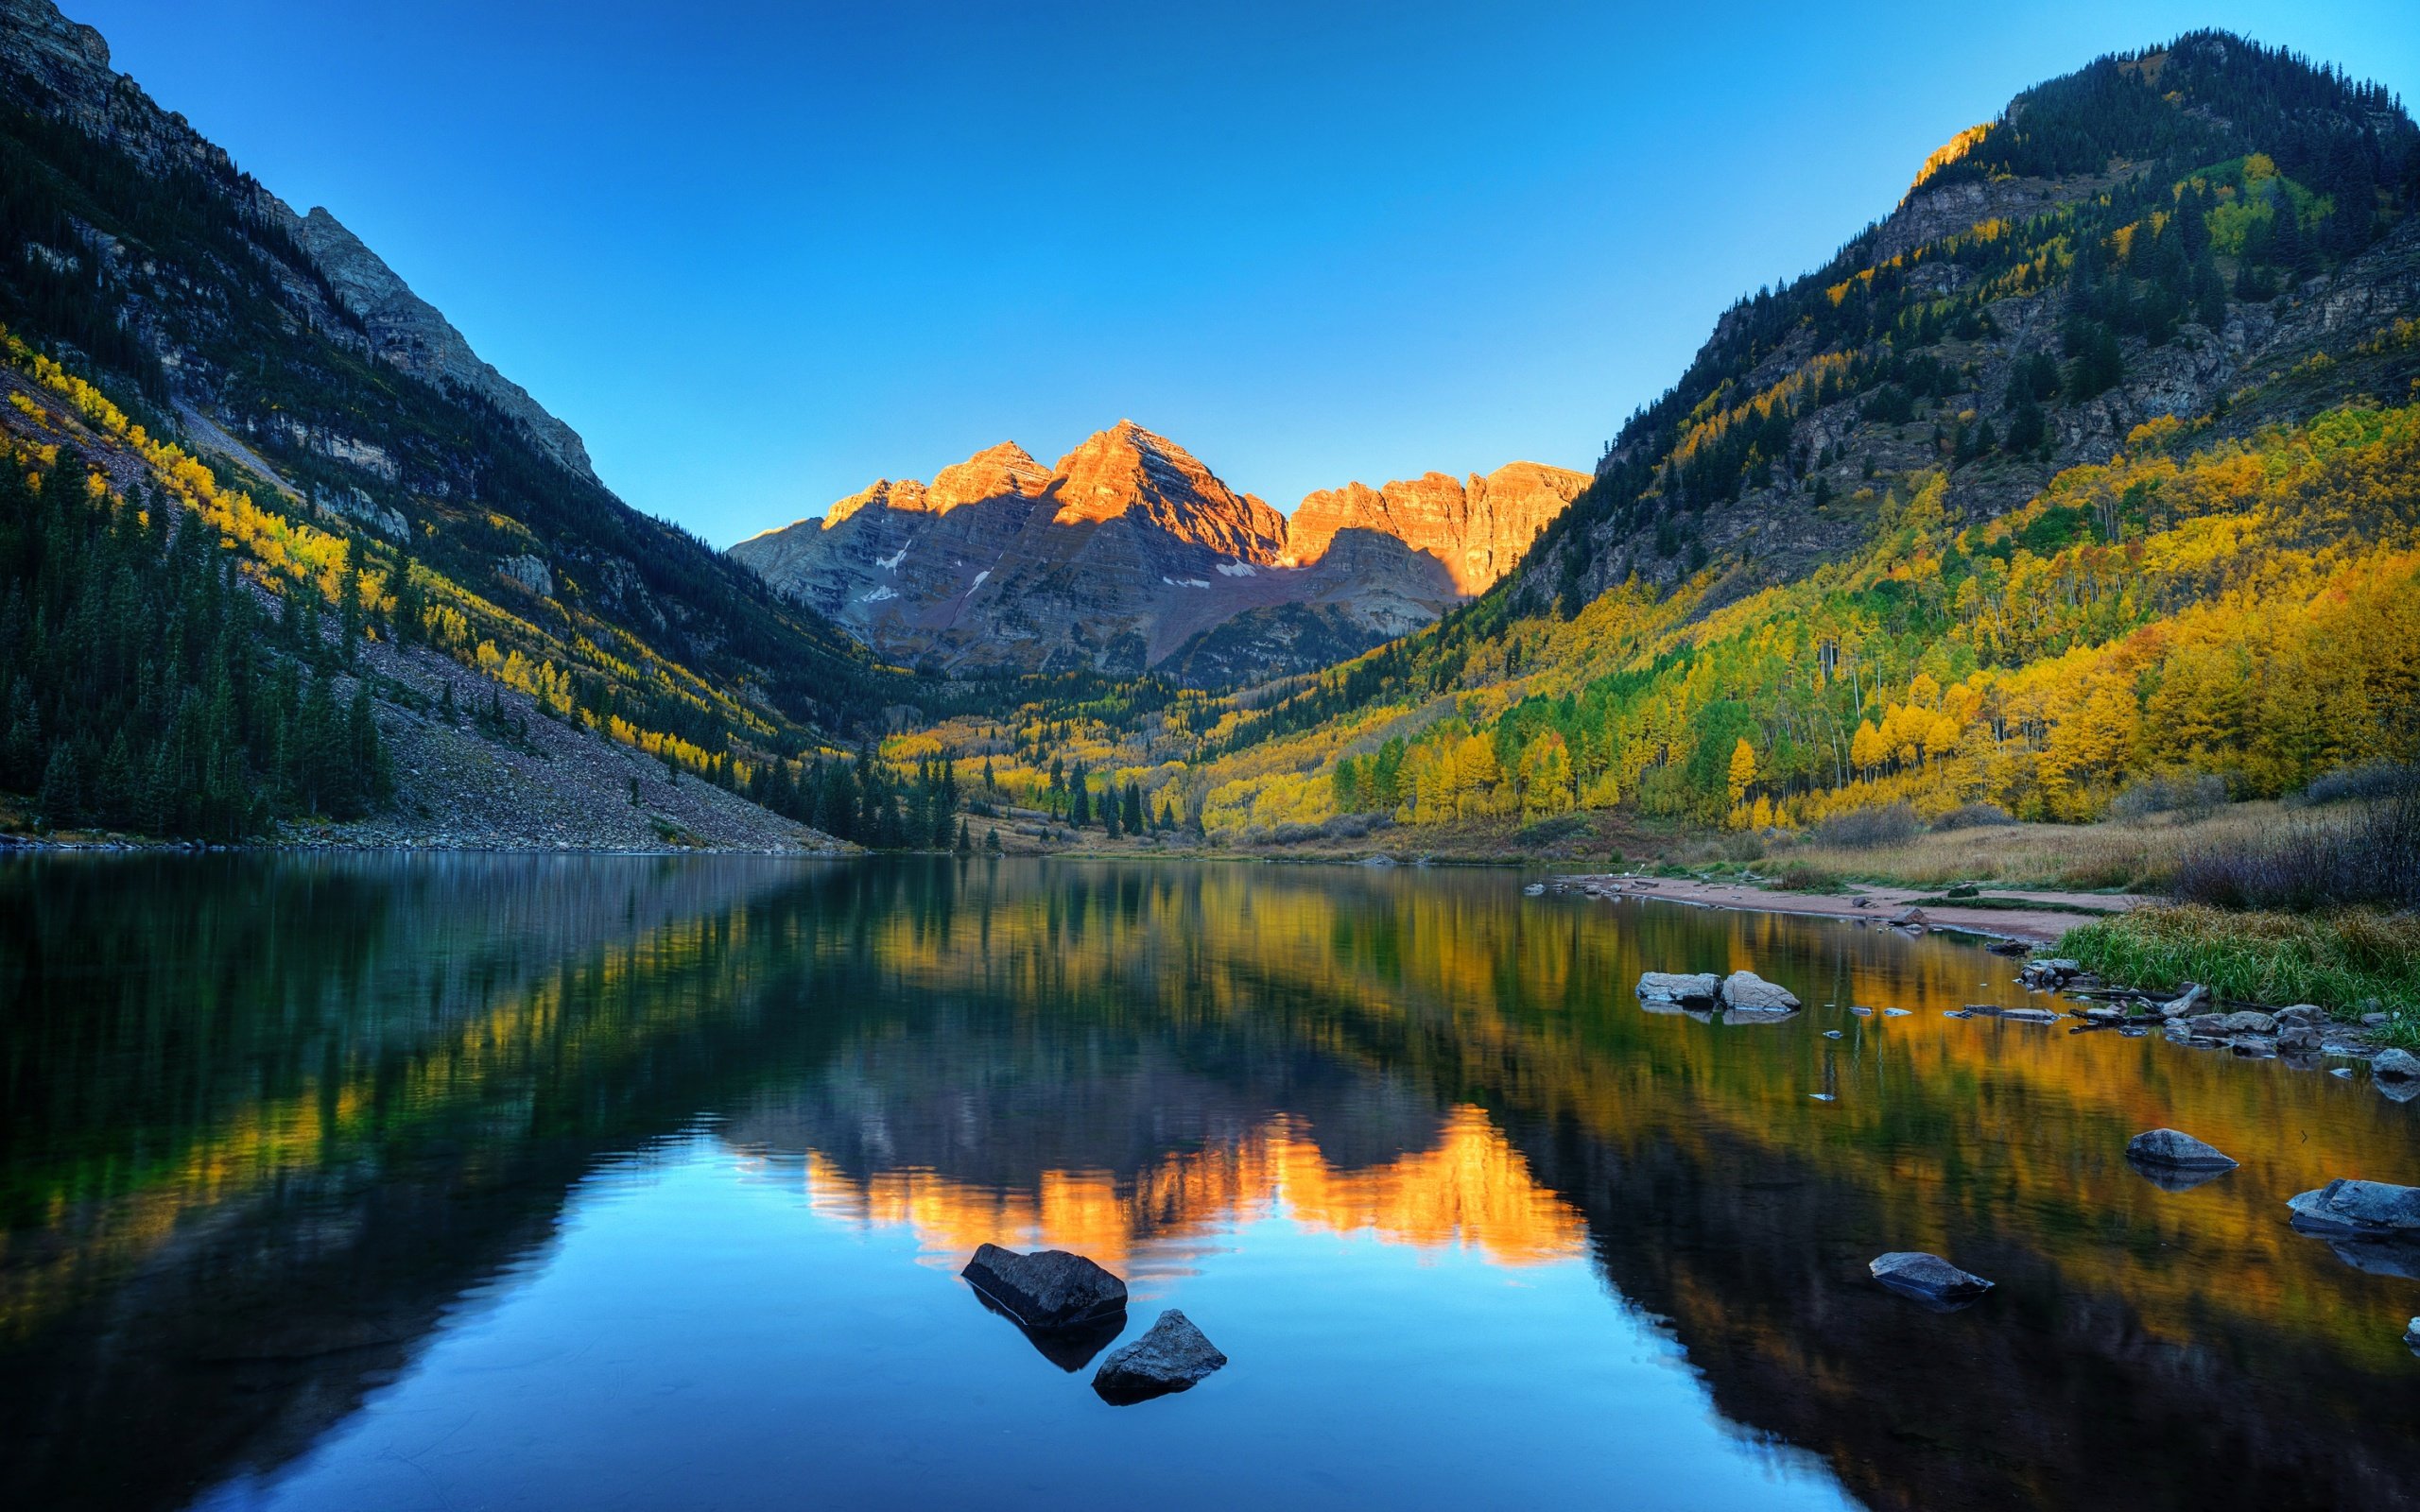 Download wallpaper Maroon Lake, Aspen, mountain lake, mountain landscape, forest, evening, sunset, autumn, Colorado, USA for desktop with resolution 2560x1600. High Quality HD picture wallpaper